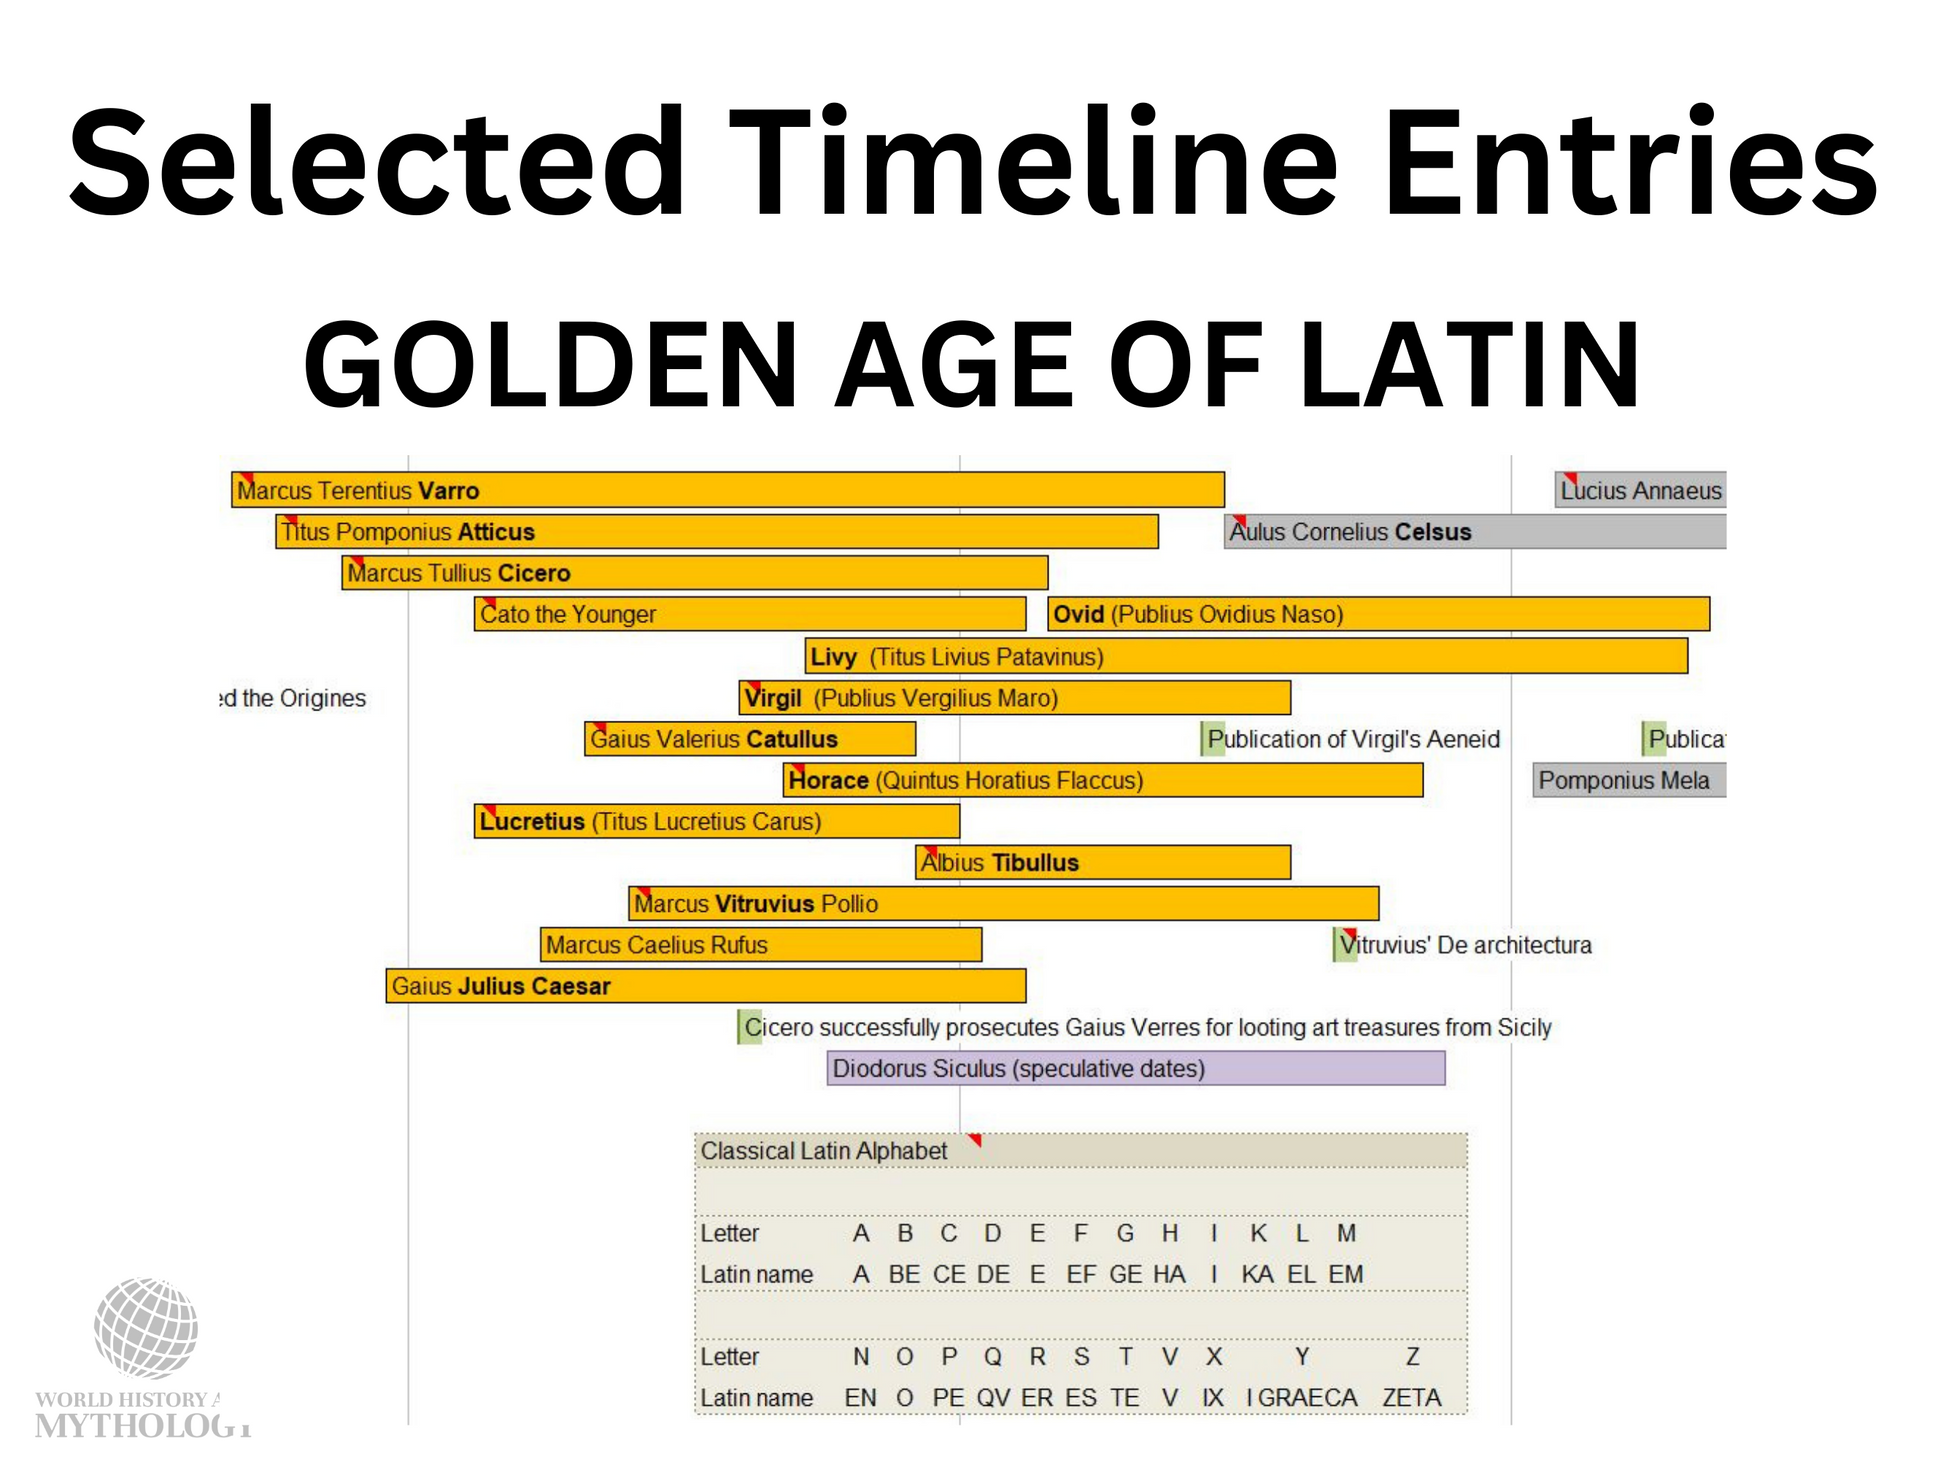 Example of a section of the Timeline of Ancient Greece and Rome showing the Golden Age of Latin.